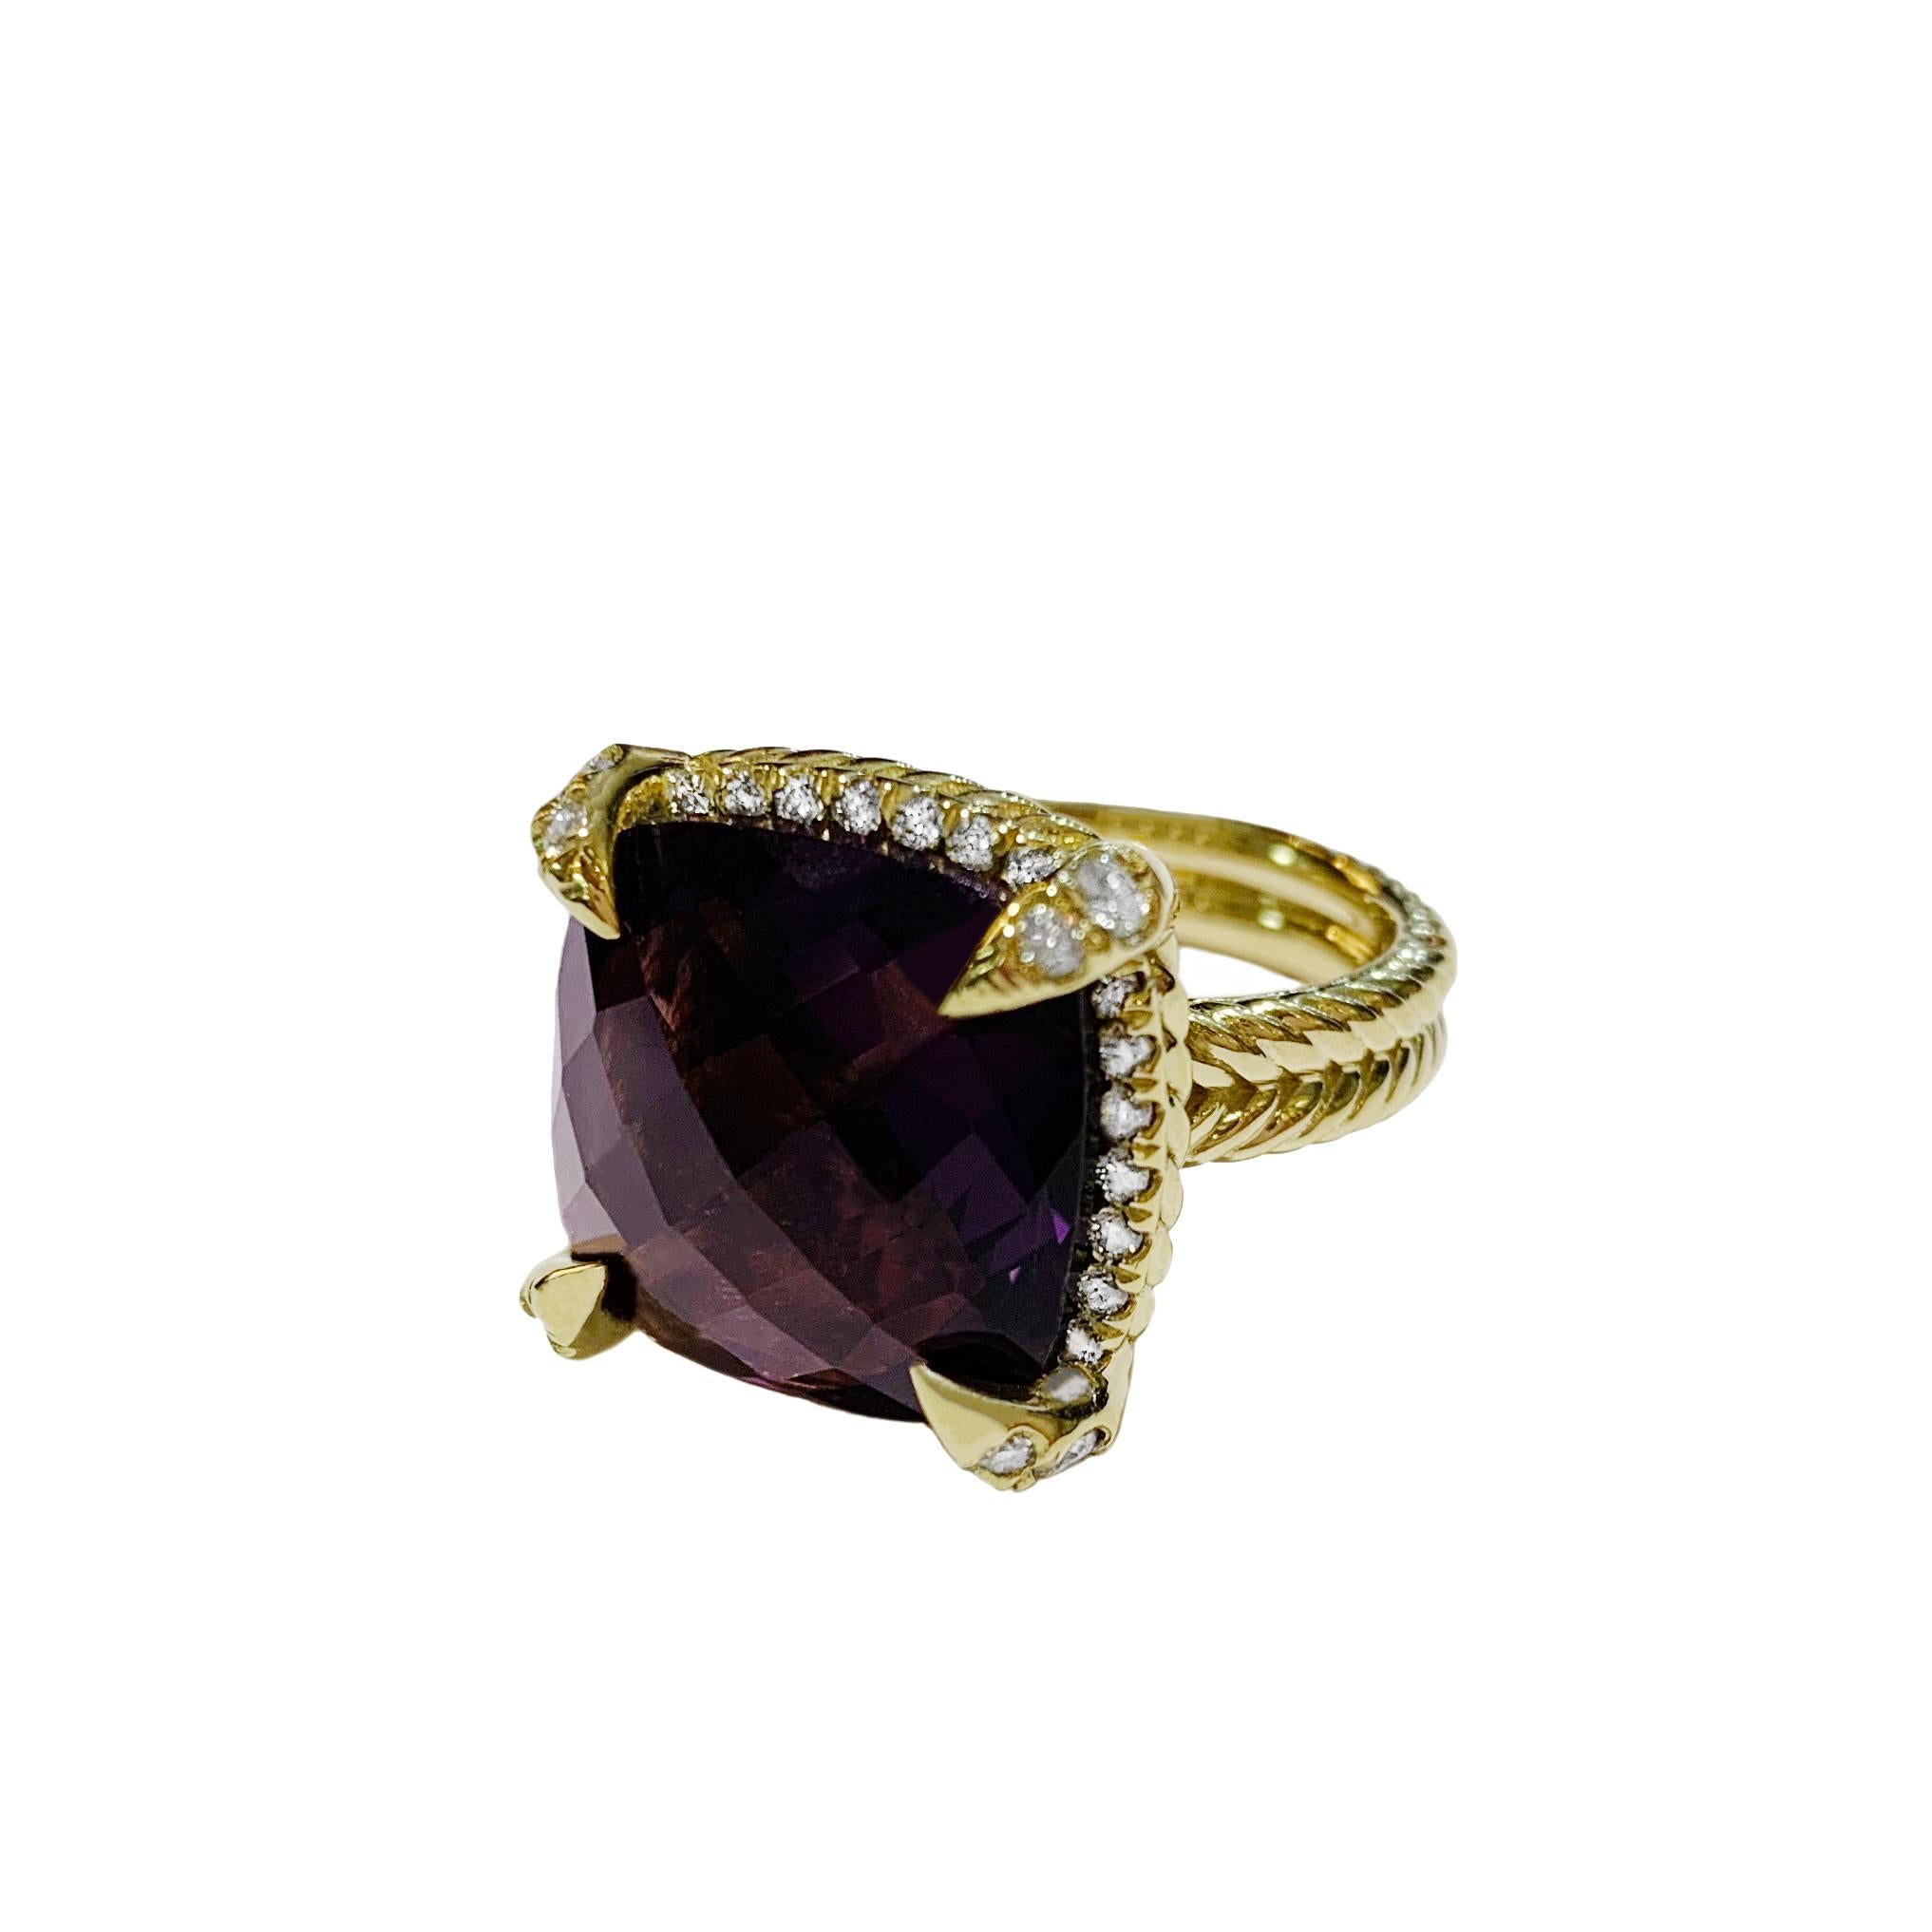 Mint condition
18k Yellow Gold
Ring size: 6
Amethyst: 14mm
Comes with David Yurman box